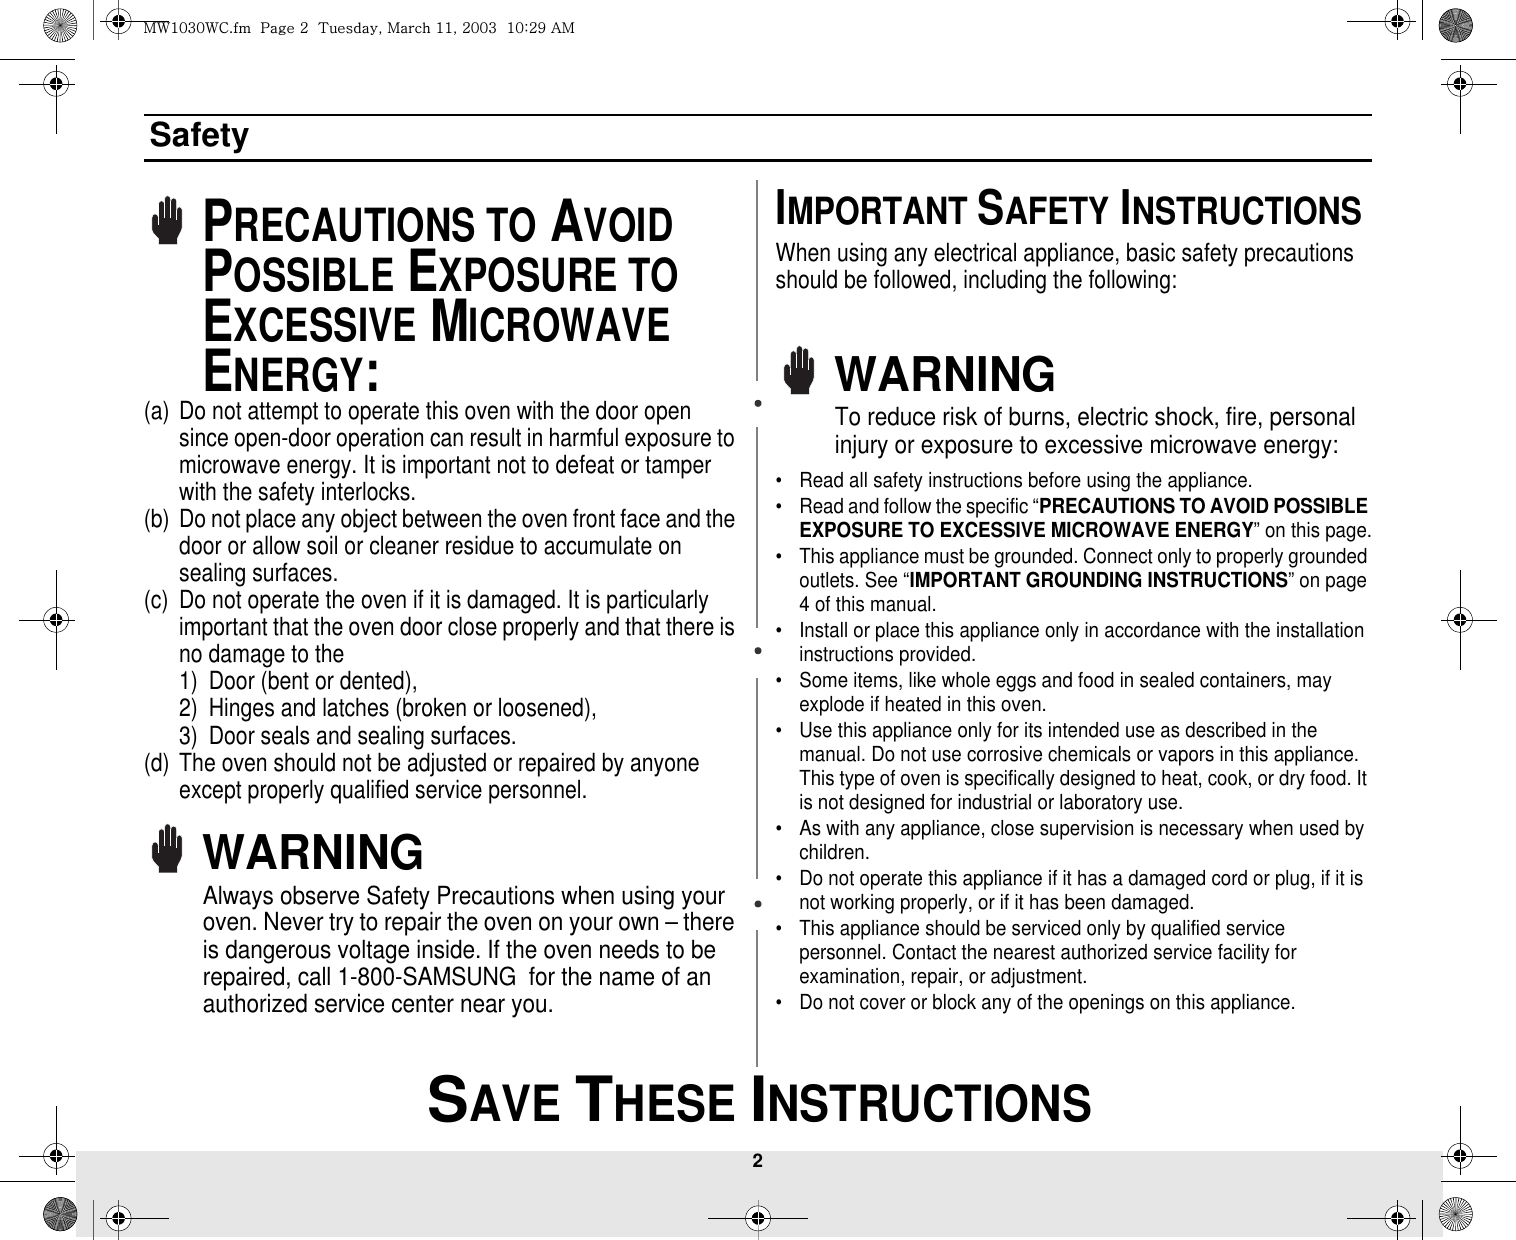 2 SAVE THESE INSTRUCTIONSSafetyPRECAUTIONS TO AVOID POSSIBLE EXPOSURE TO EXCESSIVE MICROWAVE ENERGY:(a) Do not attempt to operate this oven with the door open since open-door operation can result in harmful exposure to microwave energy. It is important not to defeat or tamper with the safety interlocks.(b) Do not place any object between the oven front face and the door or allow soil or cleaner residue to accumulate on sealing surfaces.(c) Do not operate the oven if it is damaged. It is particularly important that the oven door close properly and that there is no damage to the 1) Door (bent or dented), 2) Hinges and latches (broken or loosened), 3) Door seals and sealing surfaces.(d) The oven should not be adjusted or repaired by anyone except properly qualified service personnel.WARNINGAlways observe Safety Precautions when using your oven. Never try to repair the oven on your own – there is dangerous voltage inside. If the oven needs to be repaired, call 1-800-SAMSUNG  for the name of an authorized service center near you.IMPORTANT SAFETY INSTRUCTIONSWhen using any electrical appliance, basic safety precautions should be followed, including the following:WARNINGTo reduce risk of burns, electric shock, fire, personal injury or exposure to excessive microwave energy:• Read all safety instructions before using the appliance.• Read and follow the specific “PRECAUTIONS TO AVOID POSSIBLE EXPOSURE TO EXCESSIVE MICROWAVE ENERGY” on this page.• This appliance must be grounded. Connect only to properly grounded outlets. See “IMPORTANT GROUNDING INSTRUCTIONS” on page 4 of this manual. • Install or place this appliance only in accordance with the installation instructions provided.• Some items, like whole eggs and food in sealed containers, may explode if heated in this oven.• Use this appliance only for its intended use as described in the manual. Do not use corrosive chemicals or vapors in this appliance. This type of oven is specifically designed to heat, cook, or dry food. It is not designed for industrial or laboratory use.• As with any appliance, close supervision is necessary when used by children.• Do not operate this appliance if it has a damaged cord or plug, if it is not working properly, or if it has been damaged.• This appliance should be serviced only by qualified service personnel. Contact the nearest authorized service facility for examination, repair, or adjustment.• Do not cover or block any of the openings on this appliance.t~XWZW~jUGGwGYGG{SGtGXXSGYWWZGGXWaY`Ght